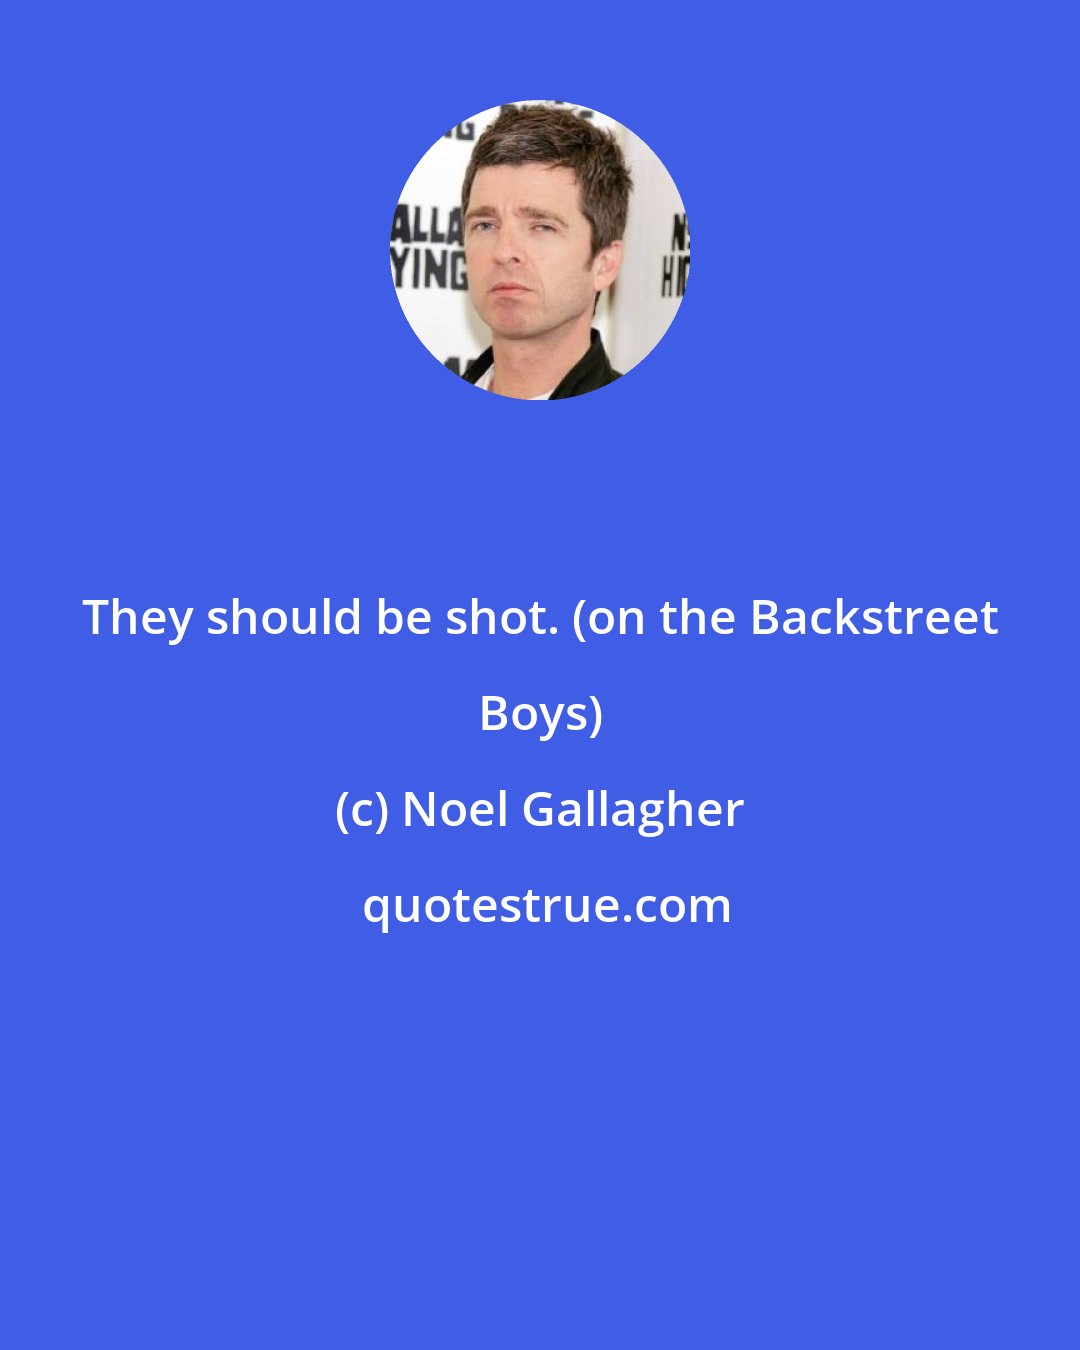 Noel Gallagher: They should be shot. (on the Backstreet Boys)